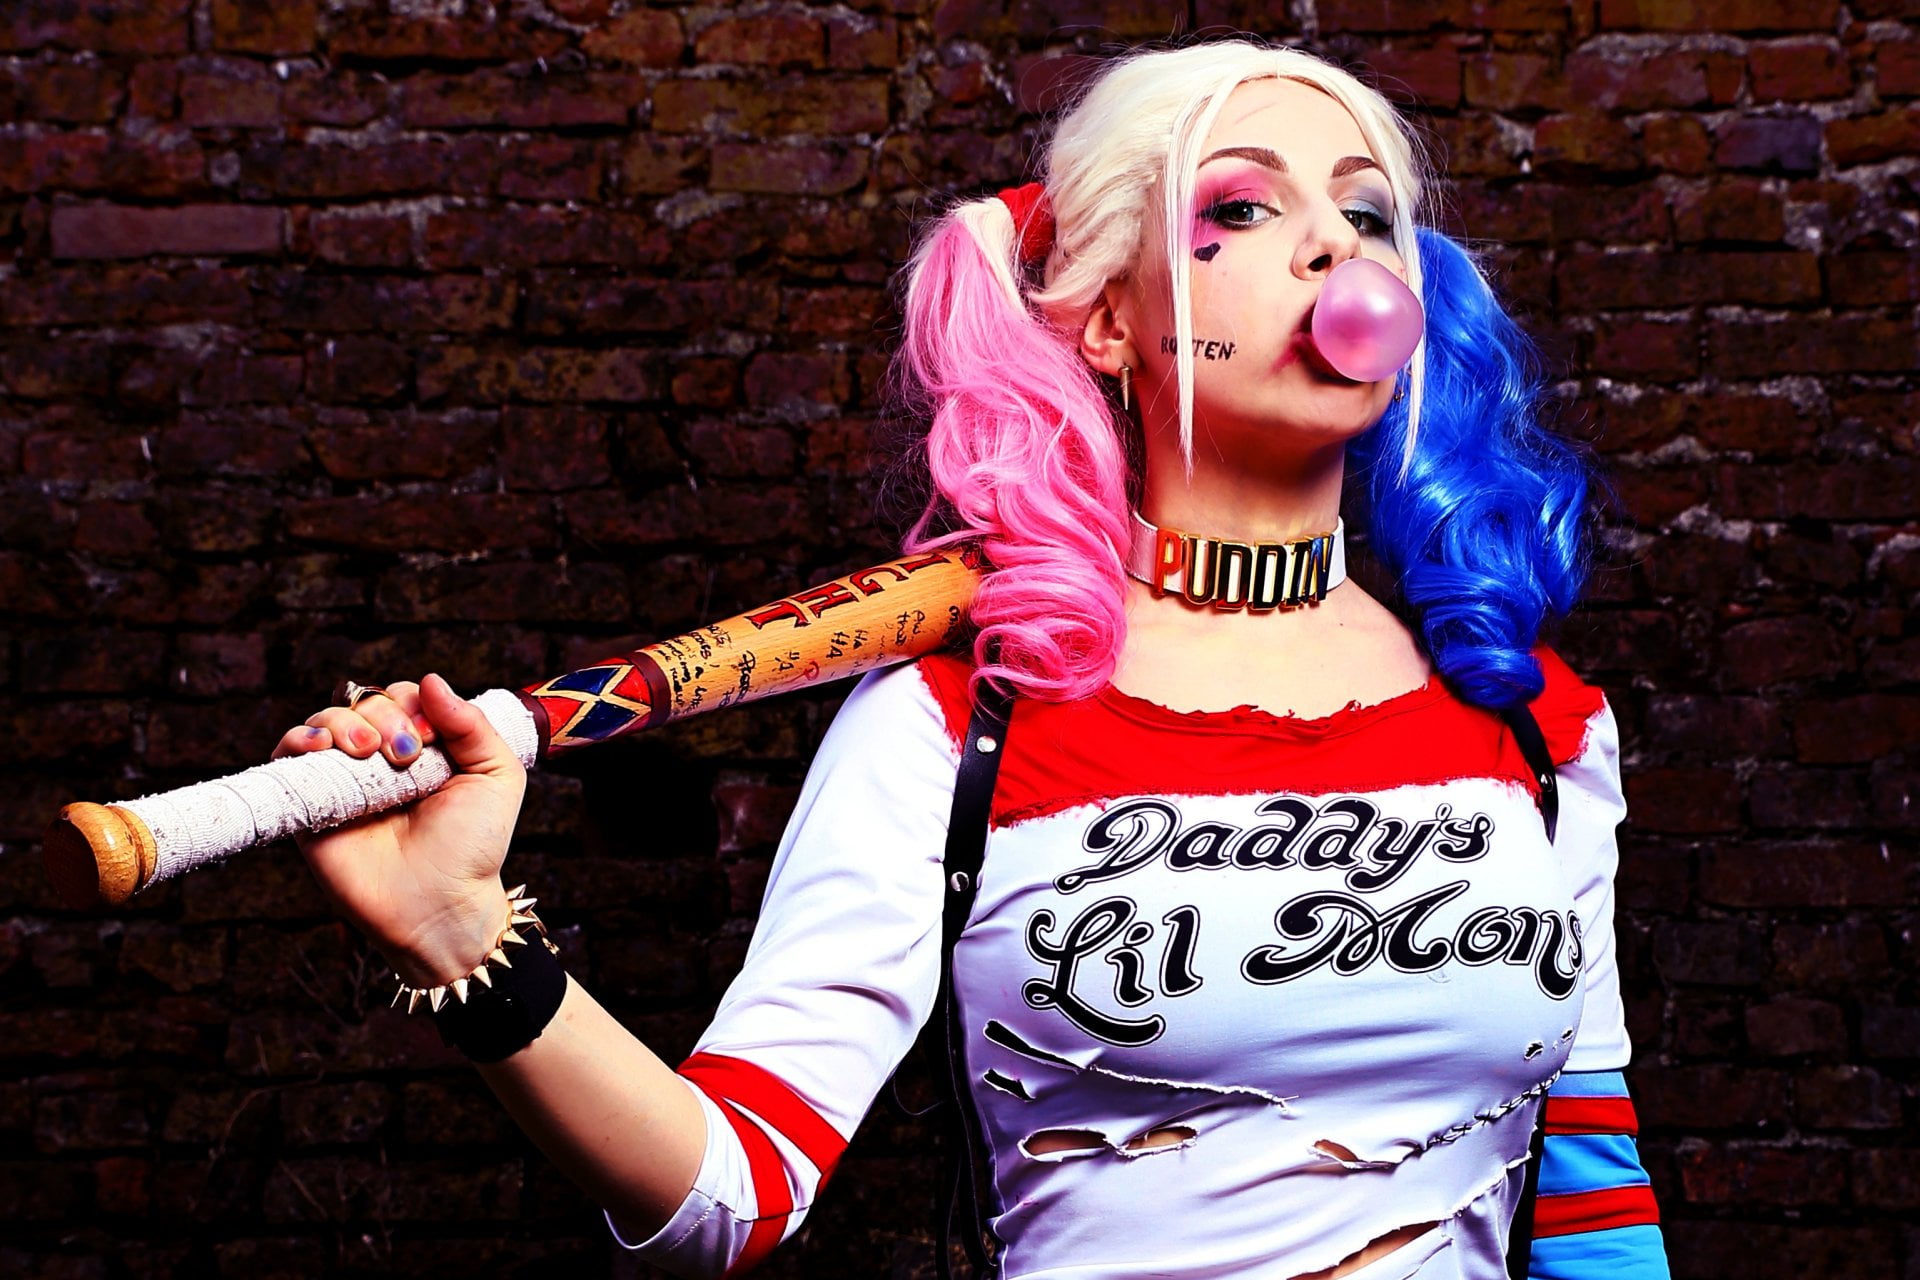 Women, Cosplay, Harley Quinn, Suicide Squad, one person, young adult